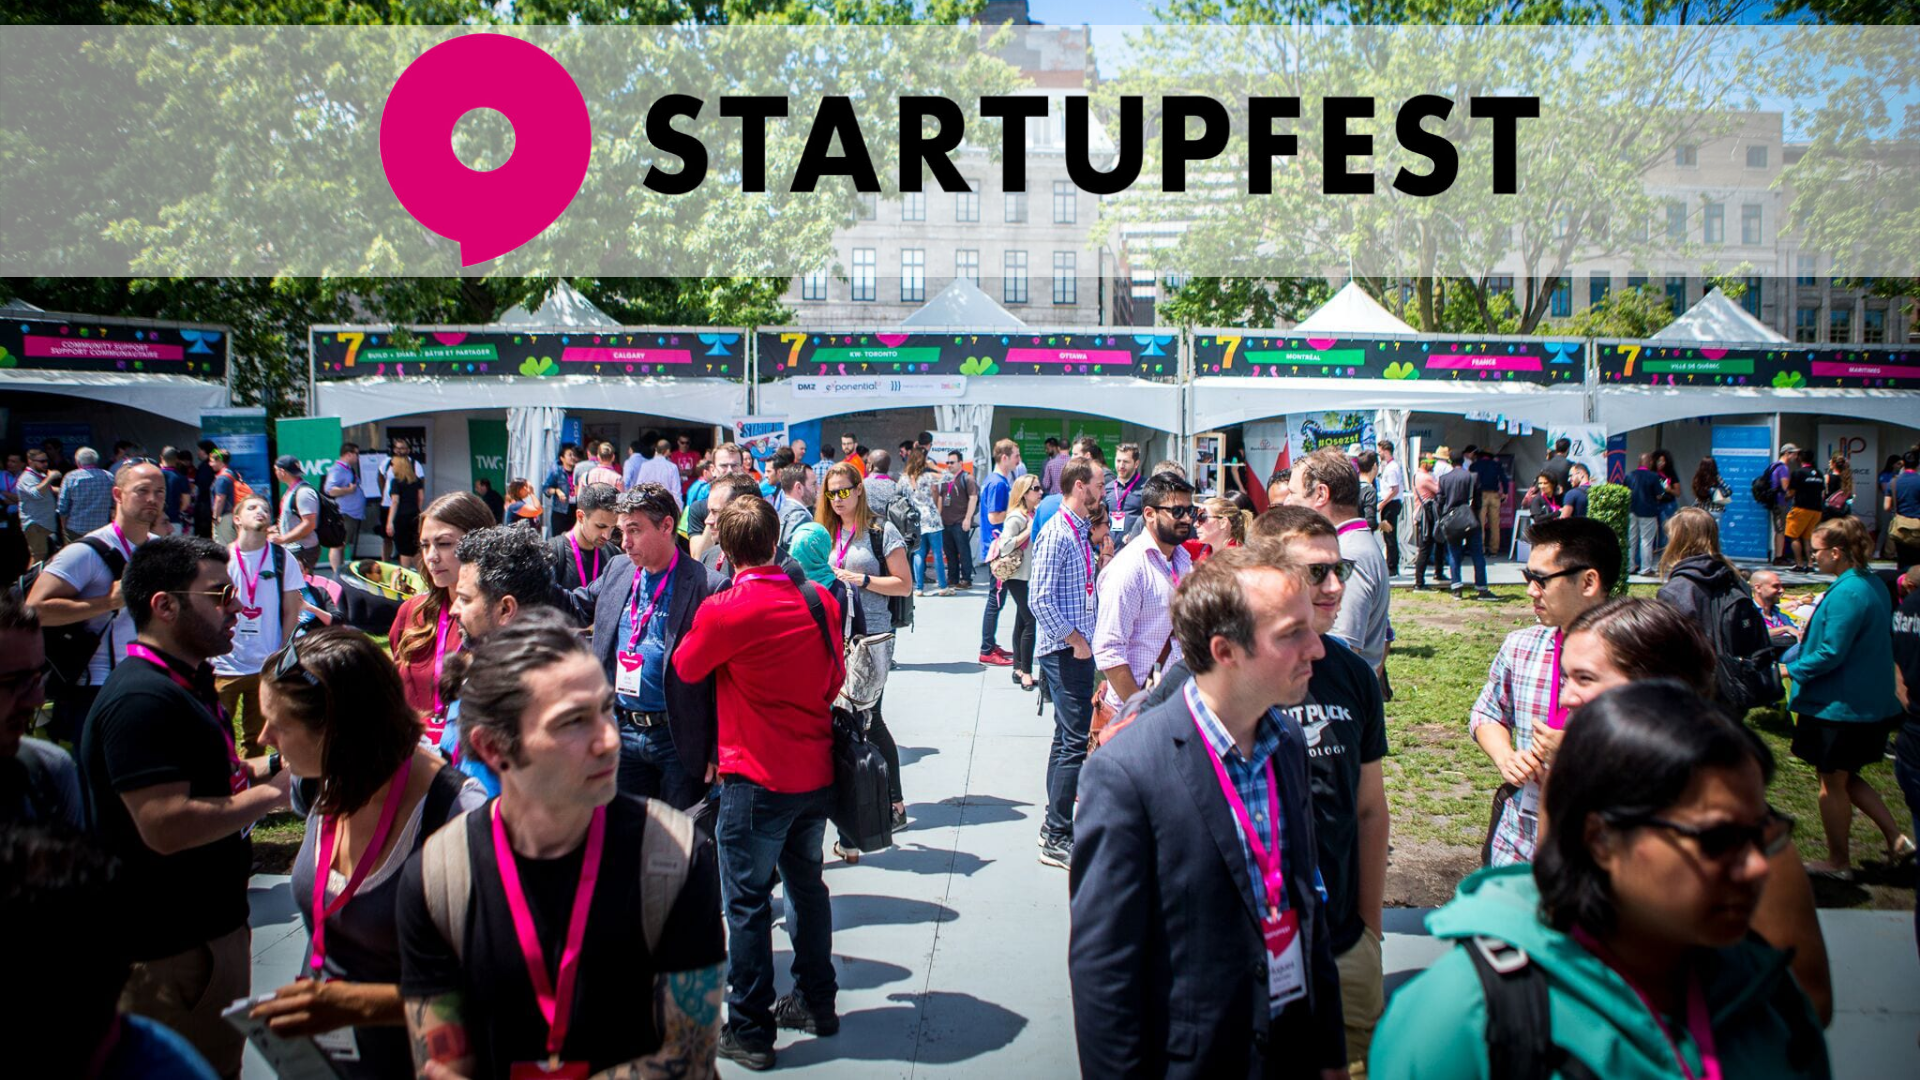 Several participants who are present at the Startupfest